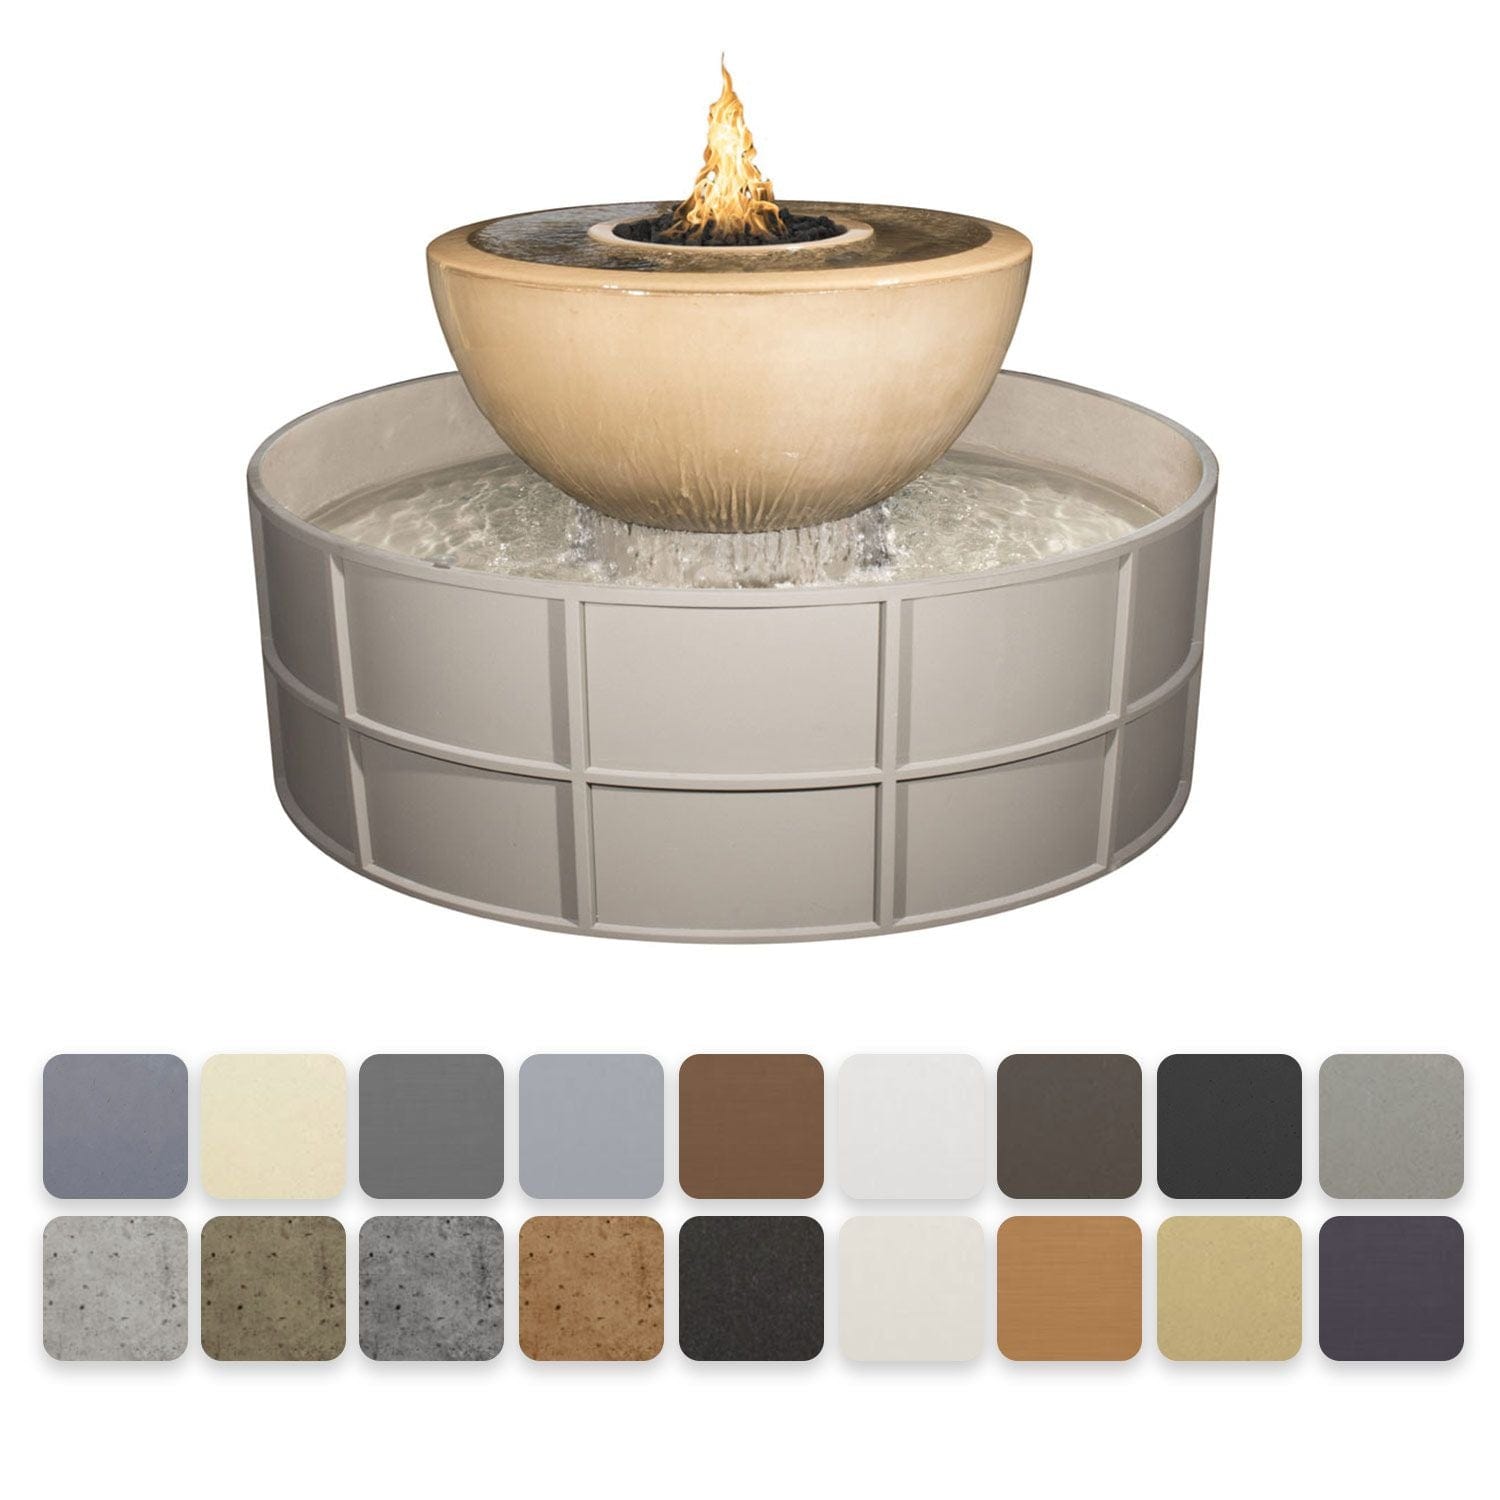 The Outdoor Plus 60-inch Sedona Fire and Water Bowl Vanilla Finish with Different Color Finish